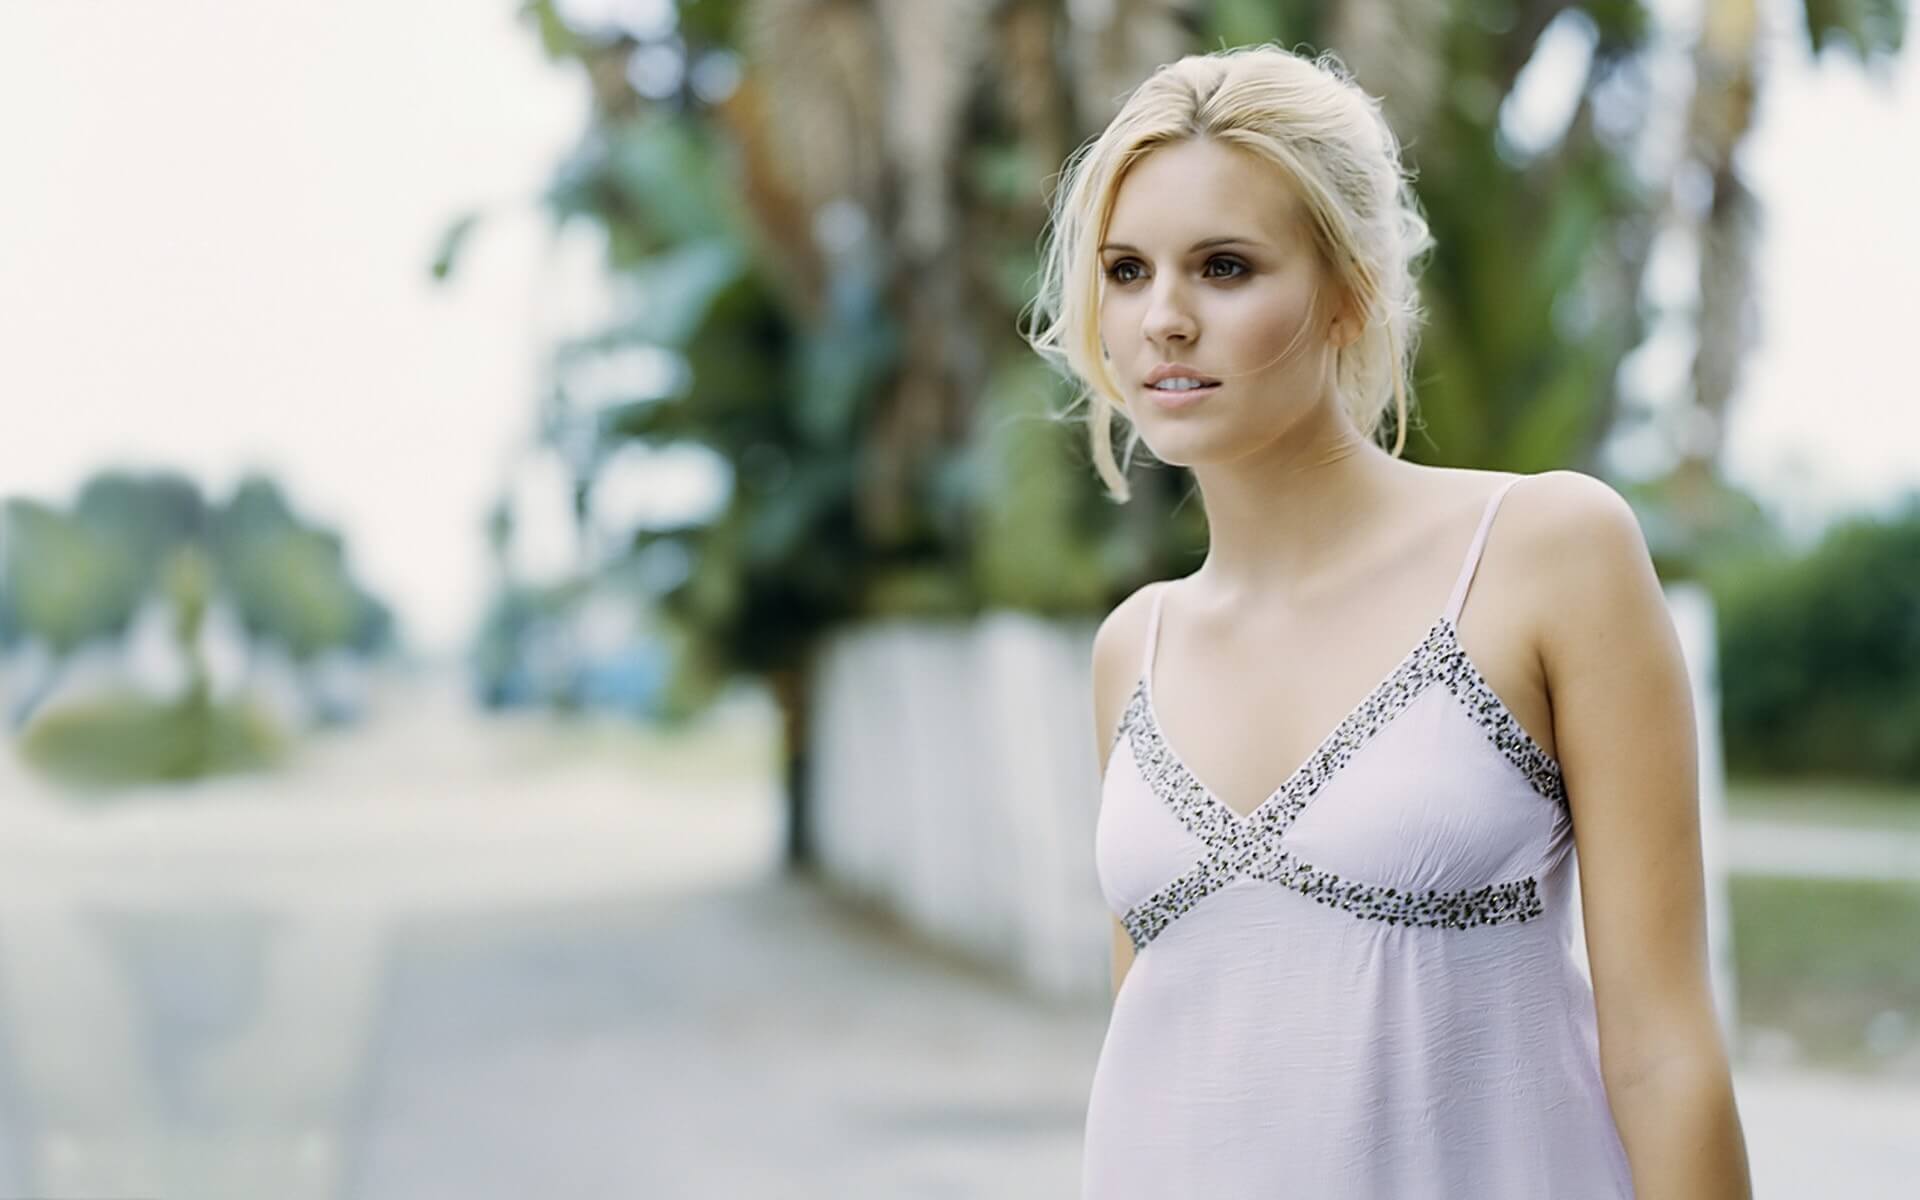 61 Hottest Maggie Grace Boobs Pictures Proves She Is A Queen Of Beauty And Love | Best Of Comic Books